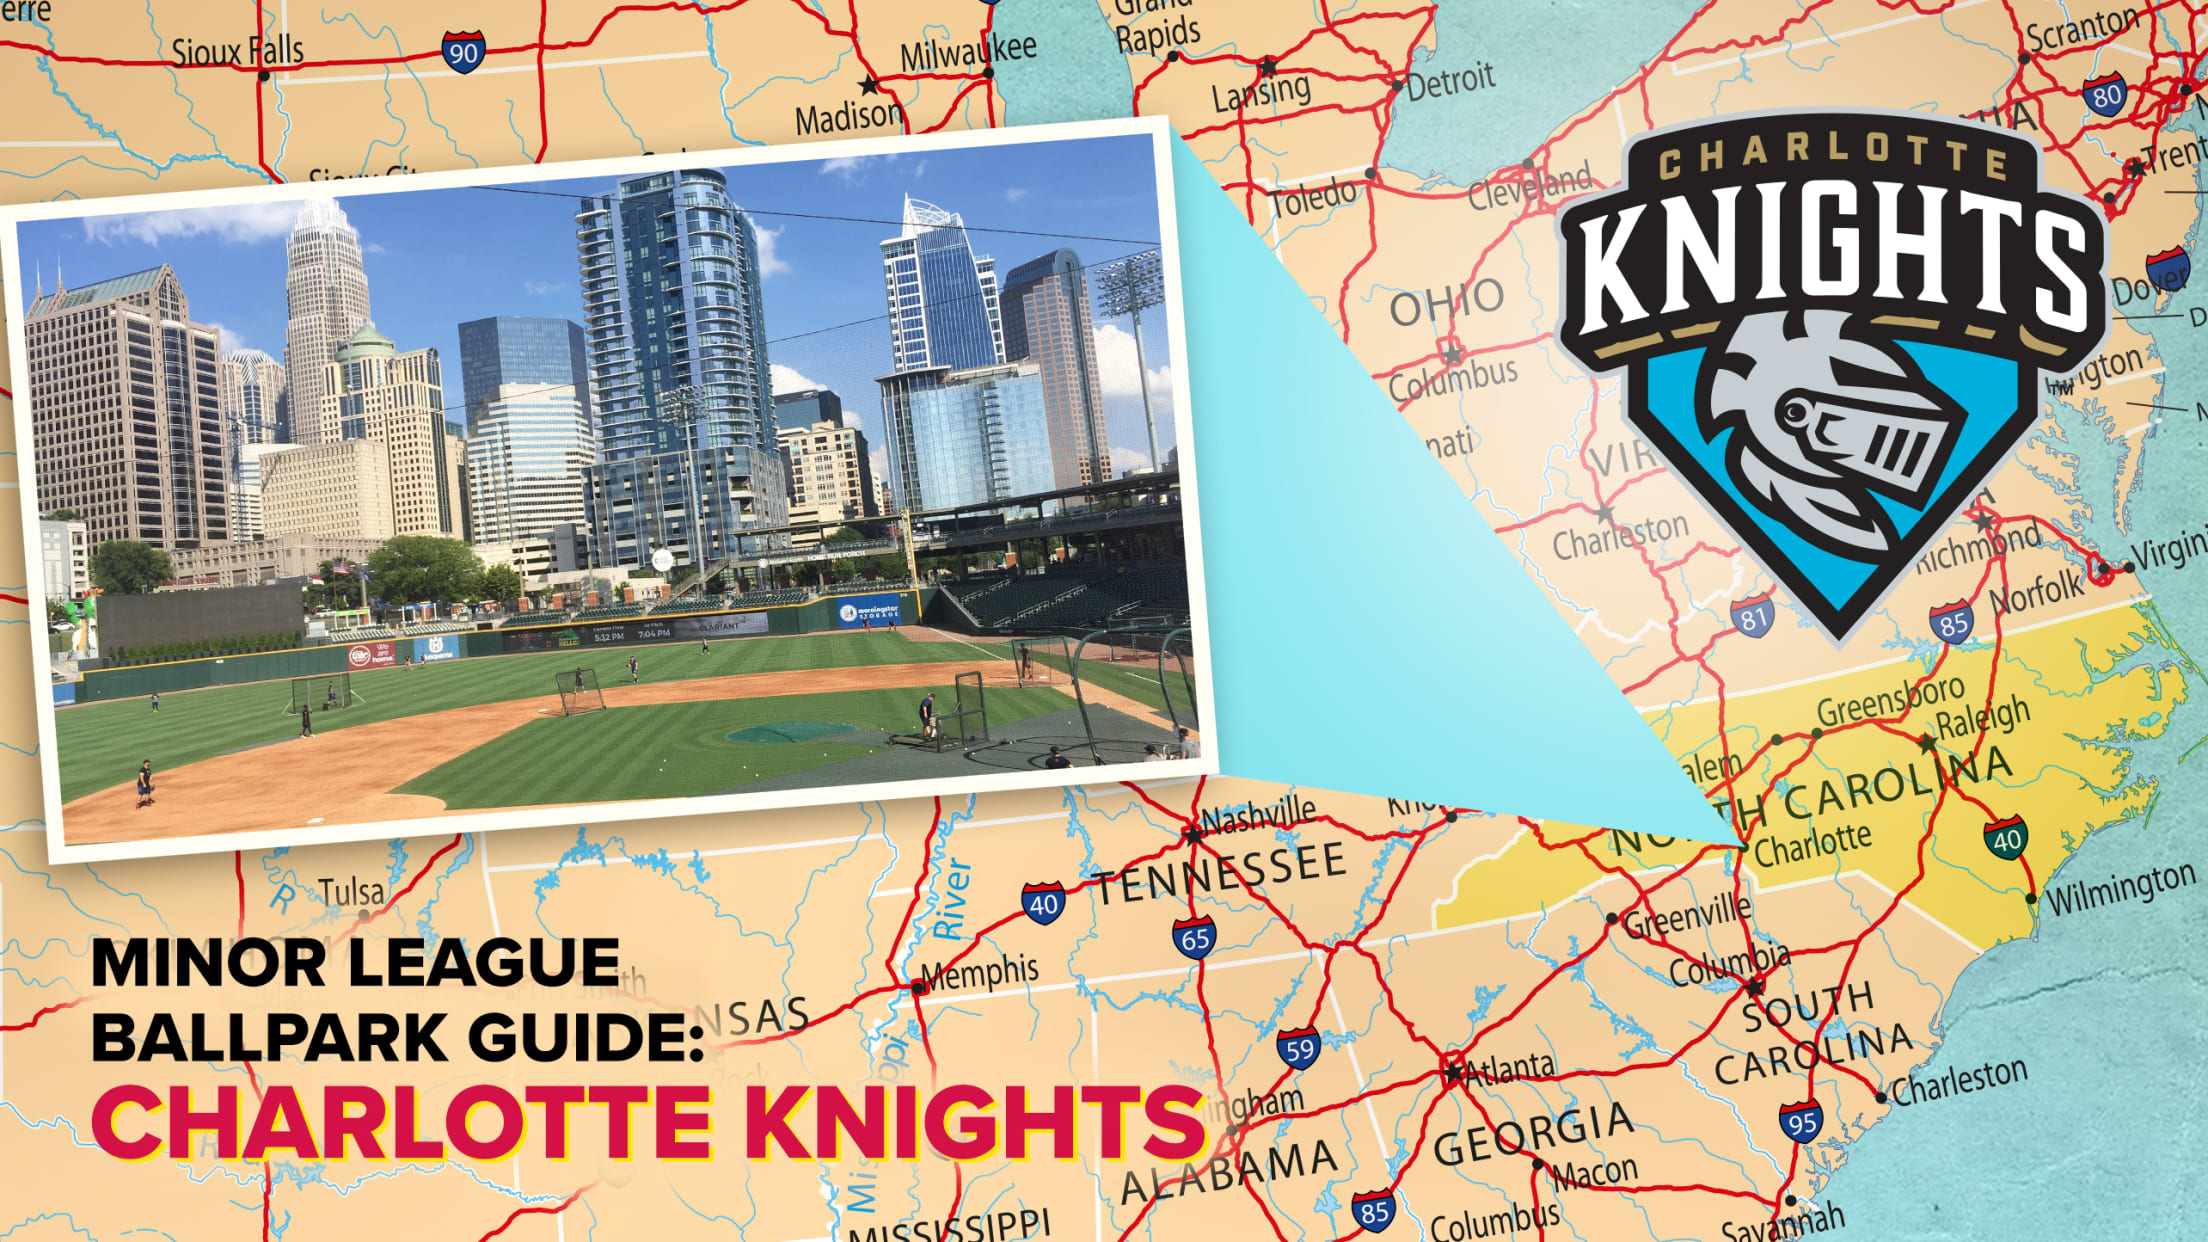 Explore Truist Field, home of the Charlotte Knights New York Mets